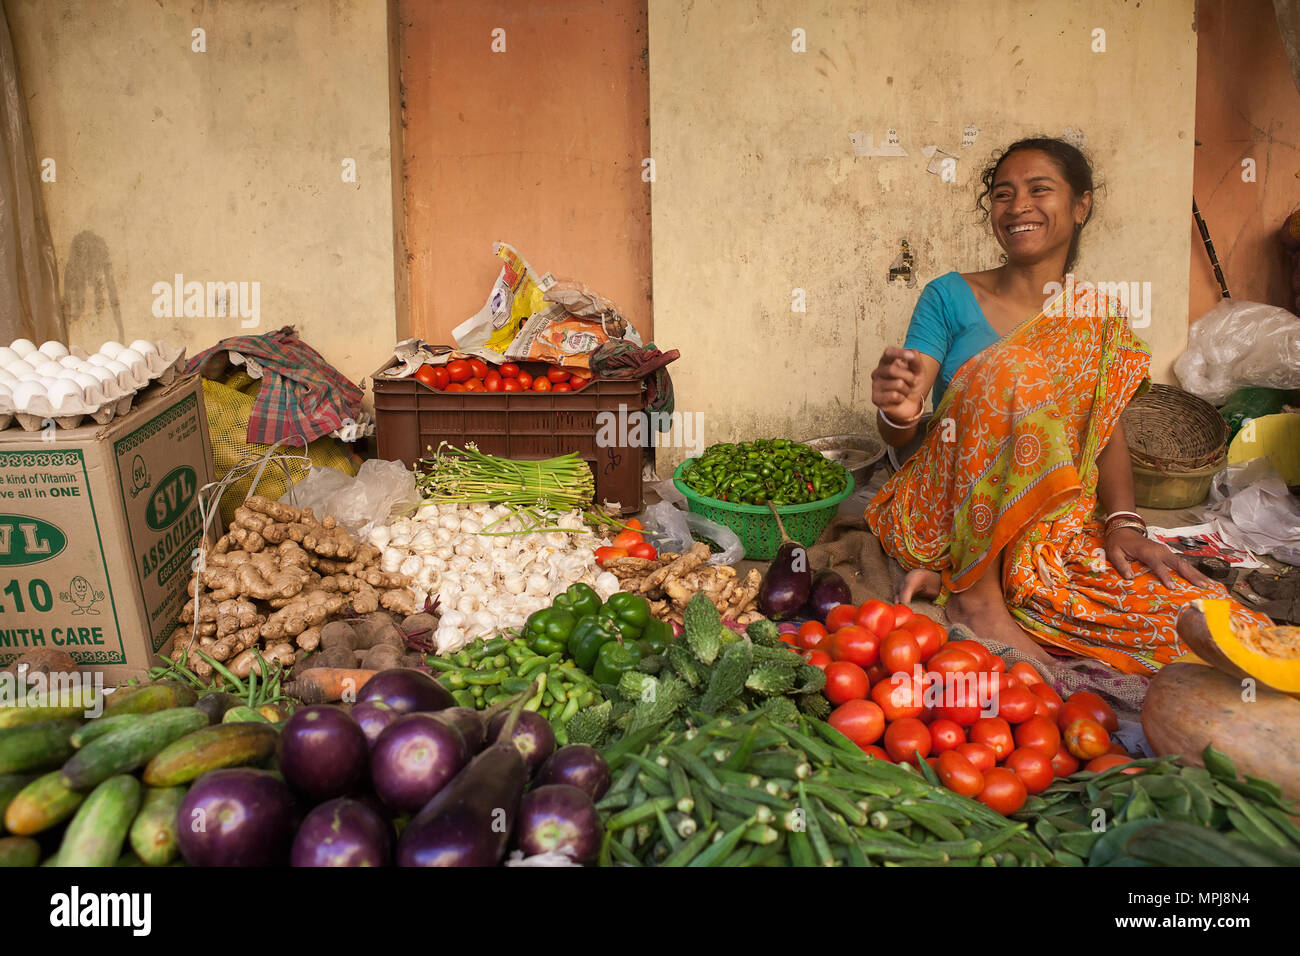 India, West Bengal, Kolkata, Vendor at the vegetable market in the Garia district. Stock Photo